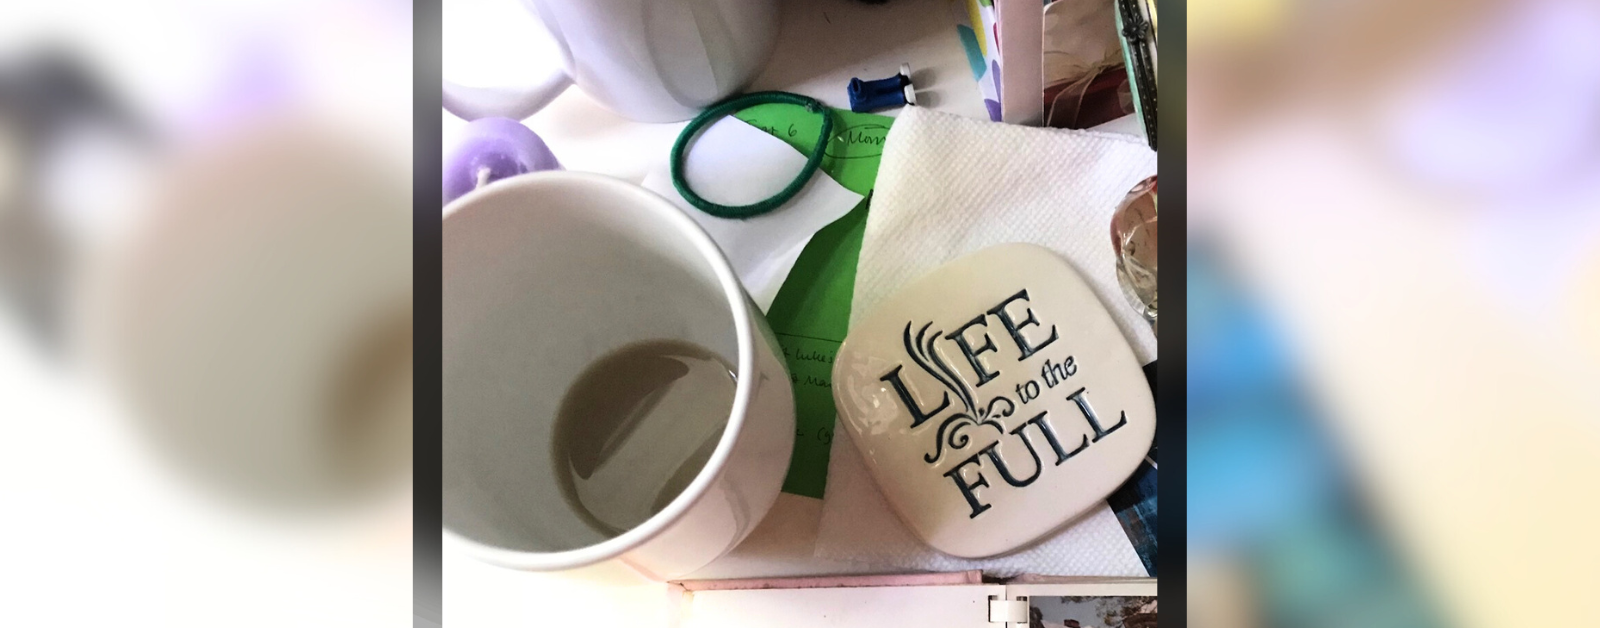 a photo looking down at a cluttered desk; in view is a nearly empty, white mug, a coaster that says "Life to the Full," a hair tie, napkins, and papers and envelopes